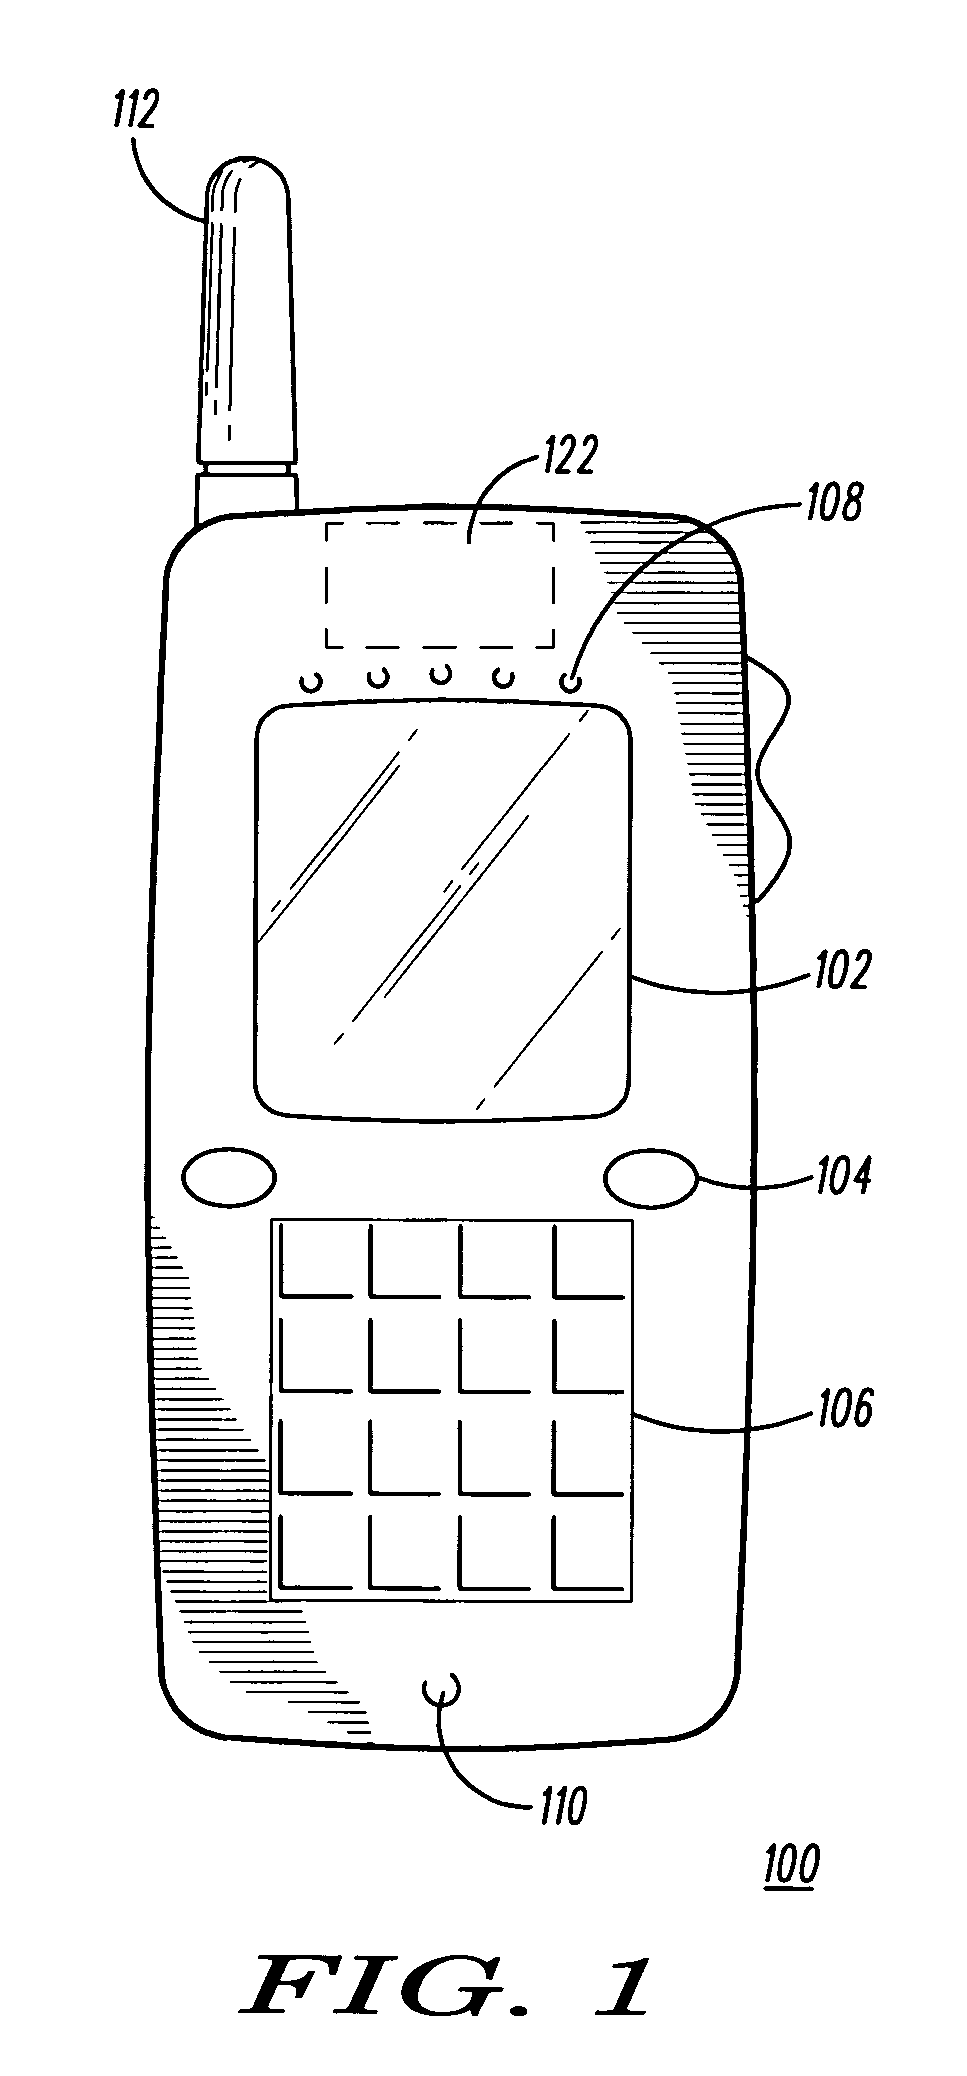 Dynamic pre-selector for a GPS receiver